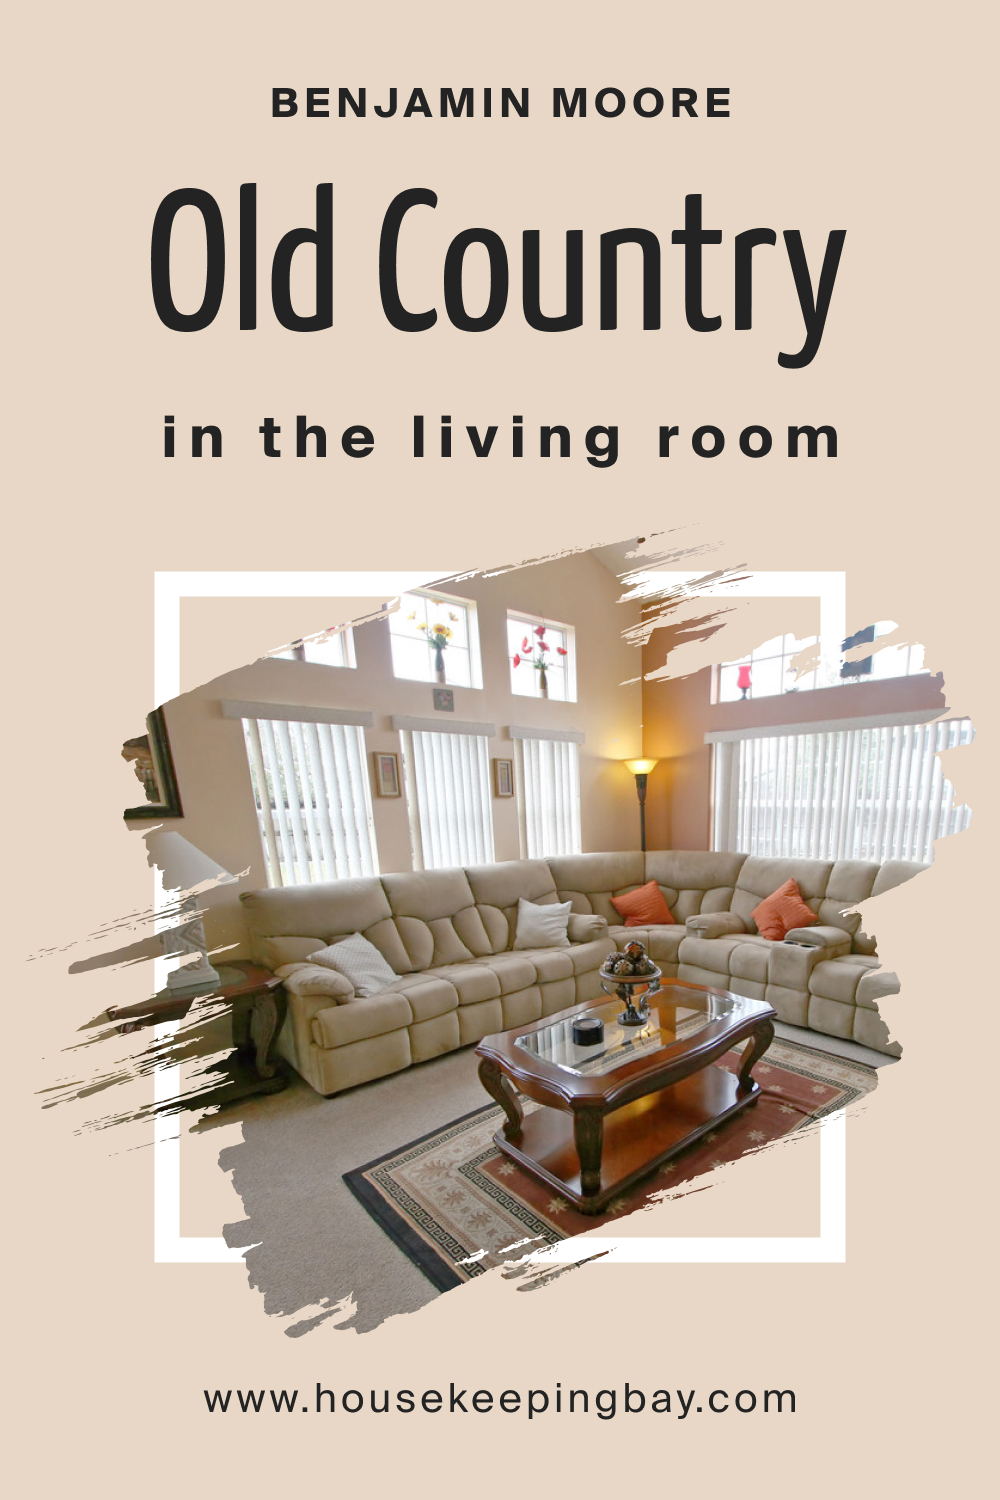 Benjamin Moore. Old Country OC 76 in the Living Room